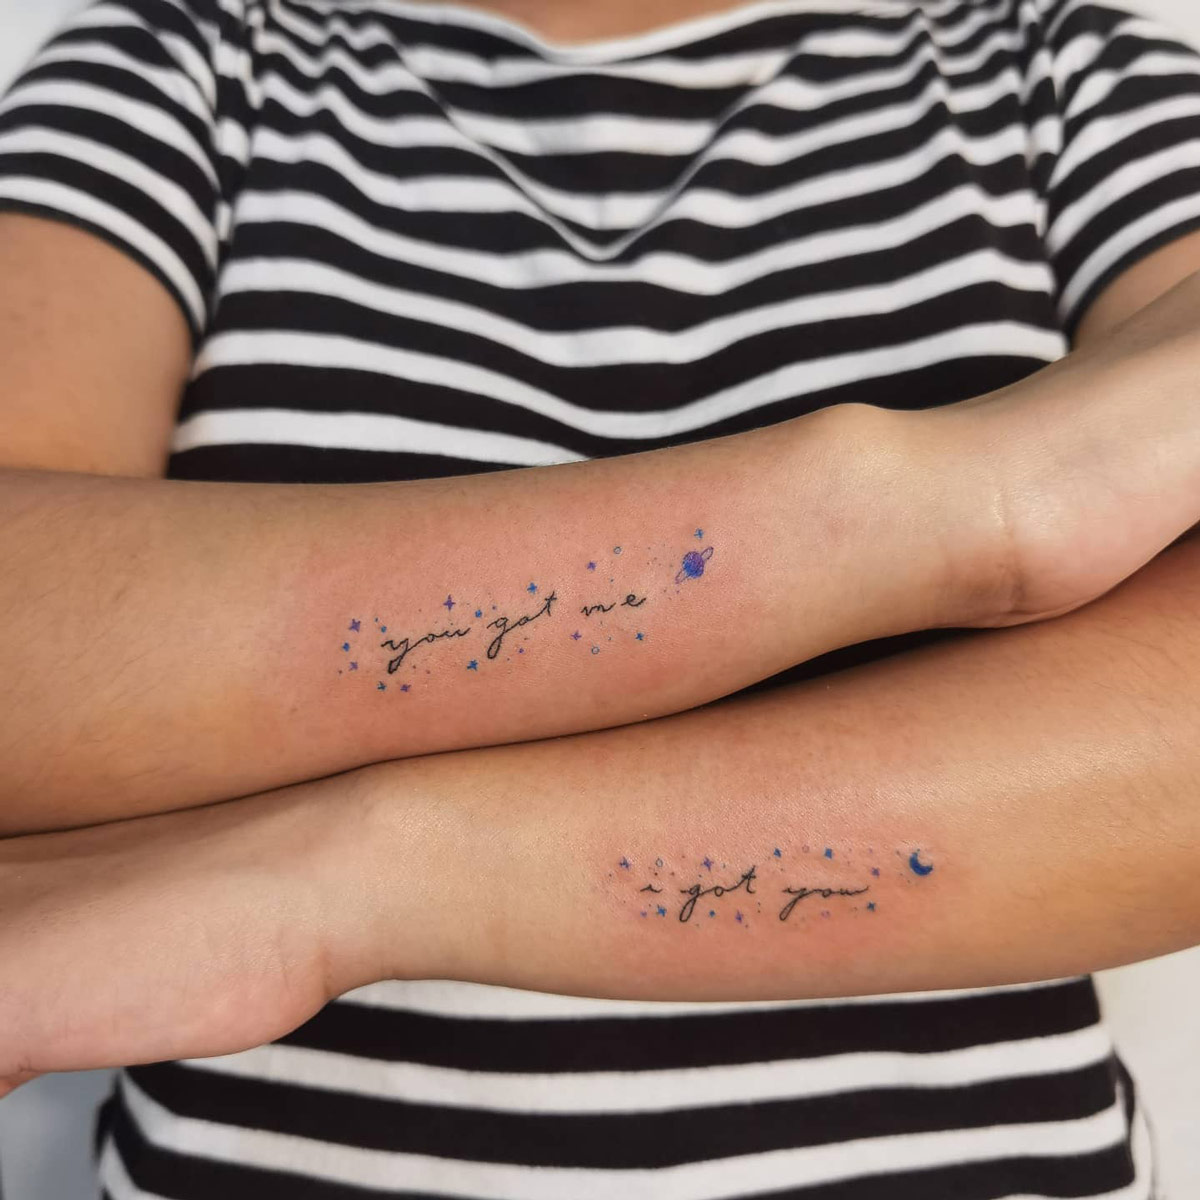 10 Meaningful Words Tattoos You Should Consider Getting Inked